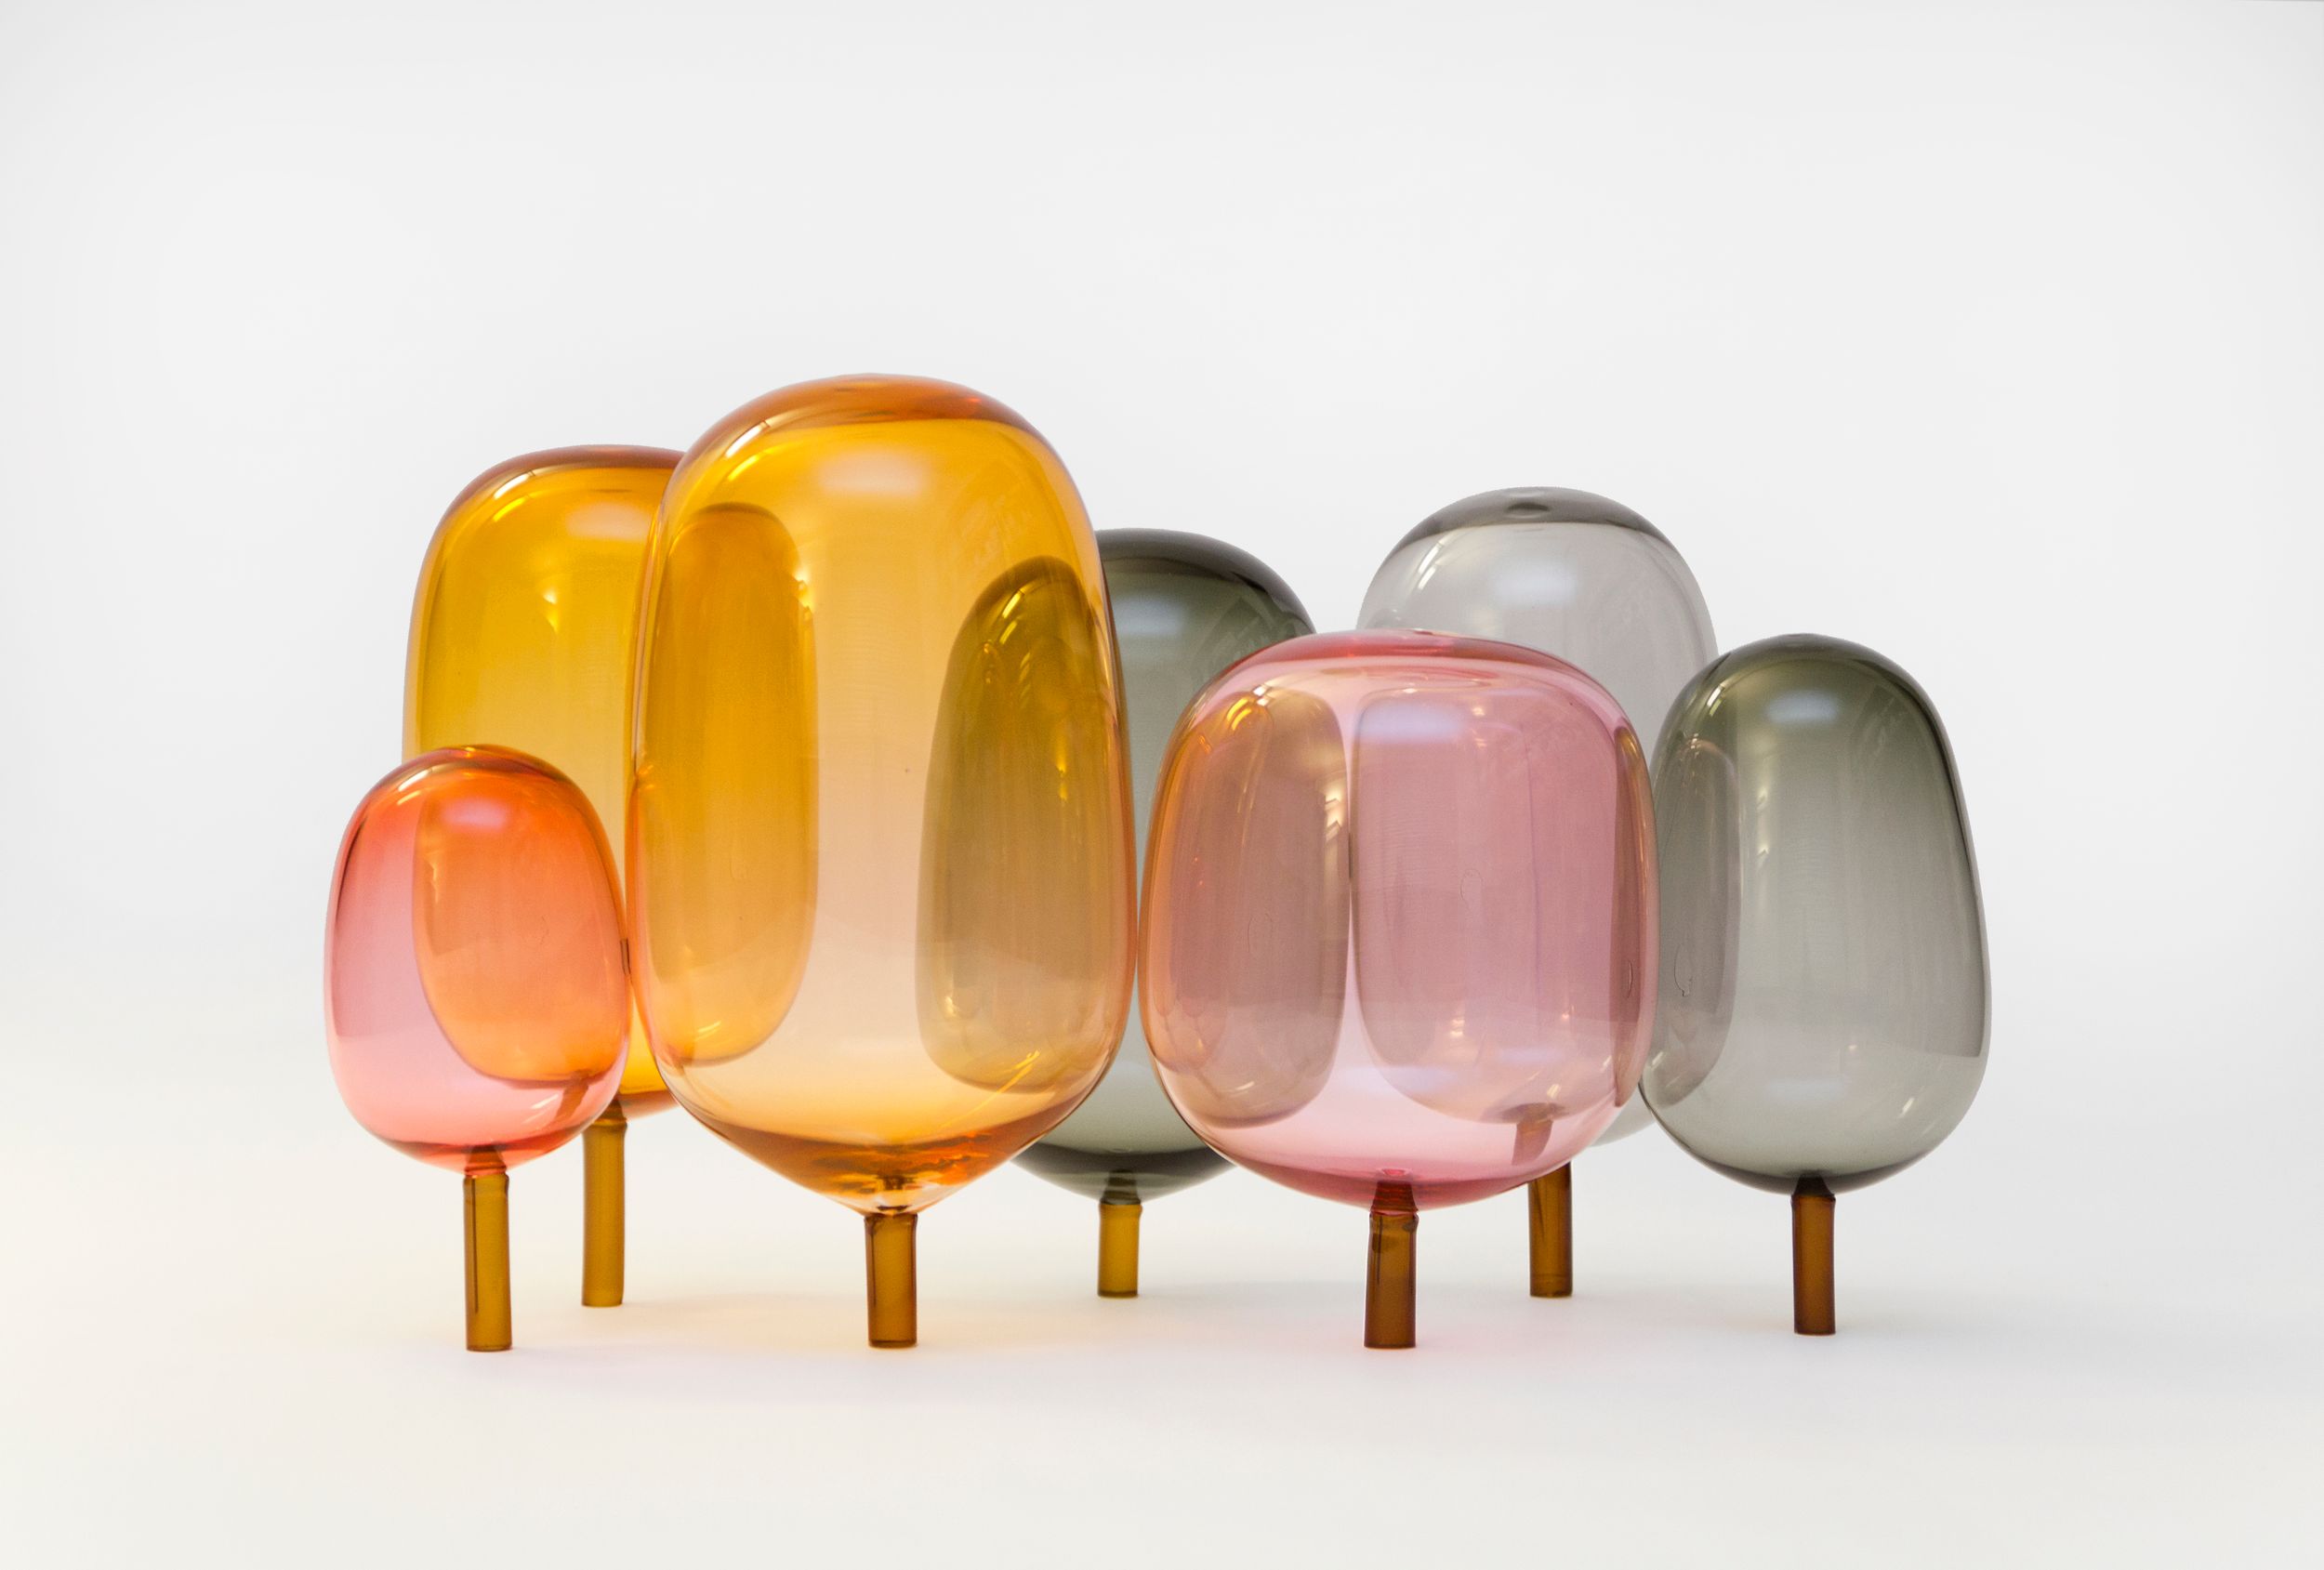 The woods designed by Jonas Stokke, Øystein Austad and Andreas Engesvik, pink and orange and grey glass sculptures, mouth blown glass